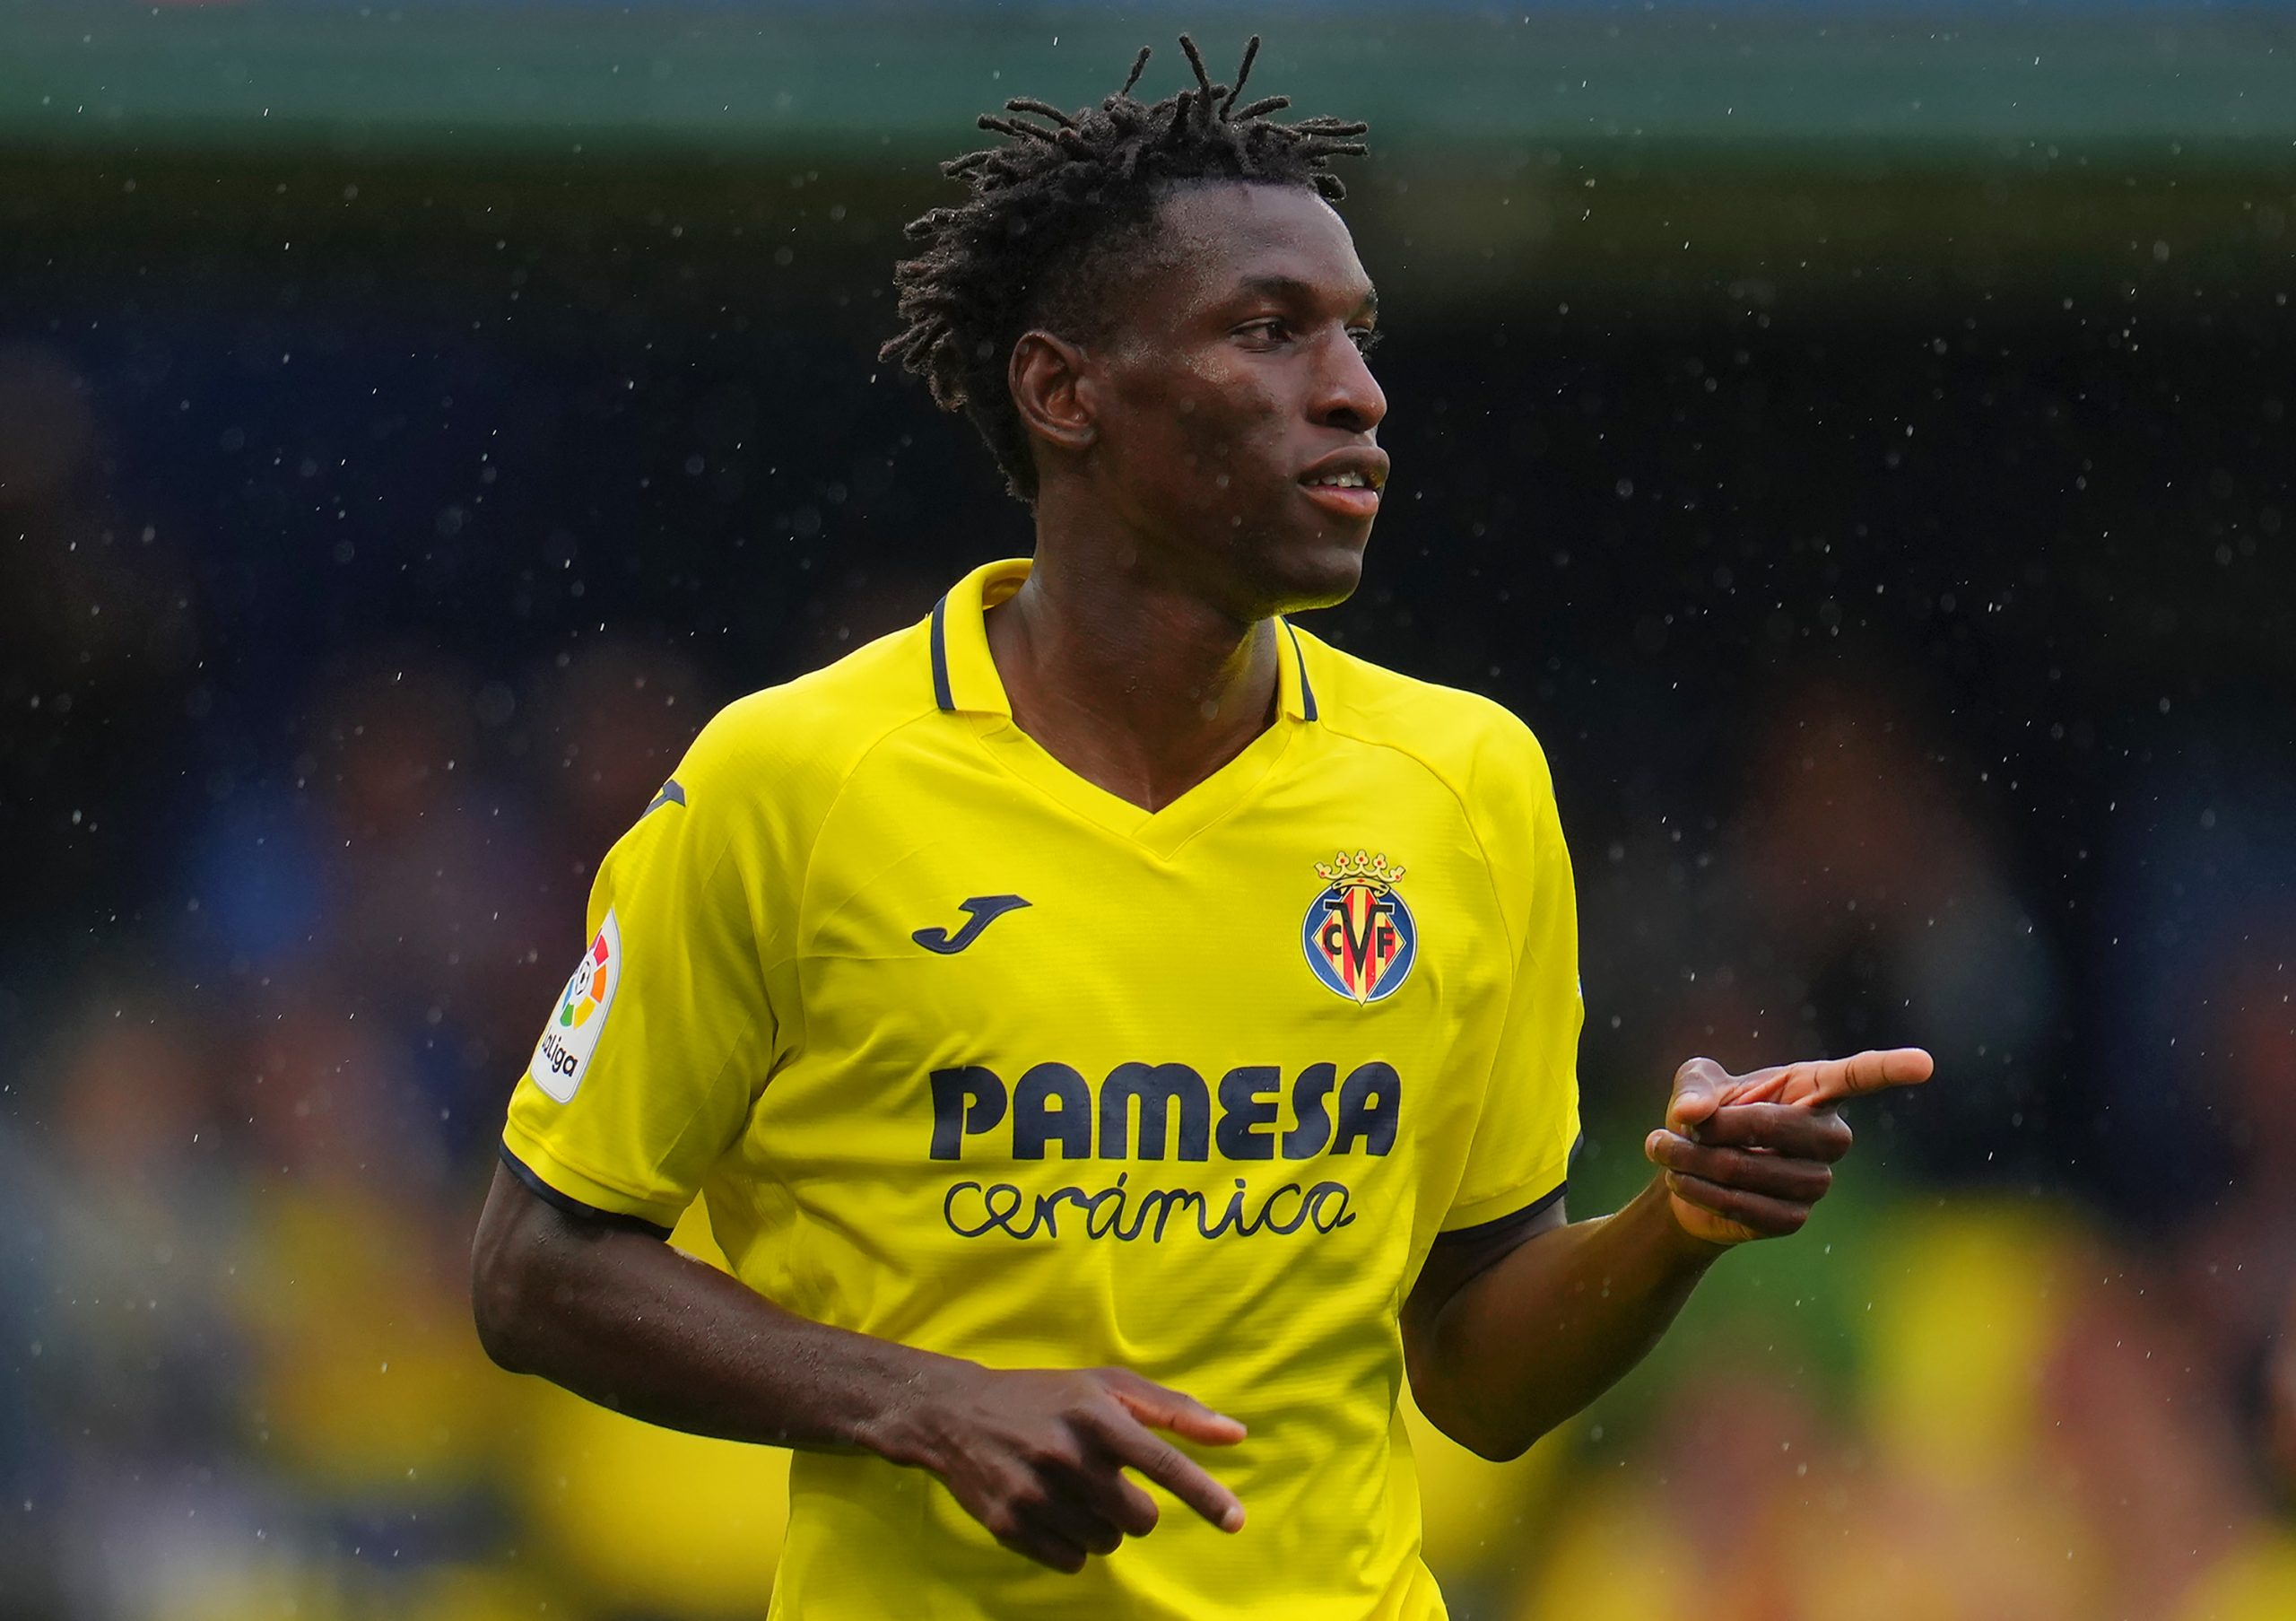 Nicolas Jackson of Villarreal CF celebrates after scoring against Athletic Bilbao. (Photo by Aitor Alcalde/Getty Images)